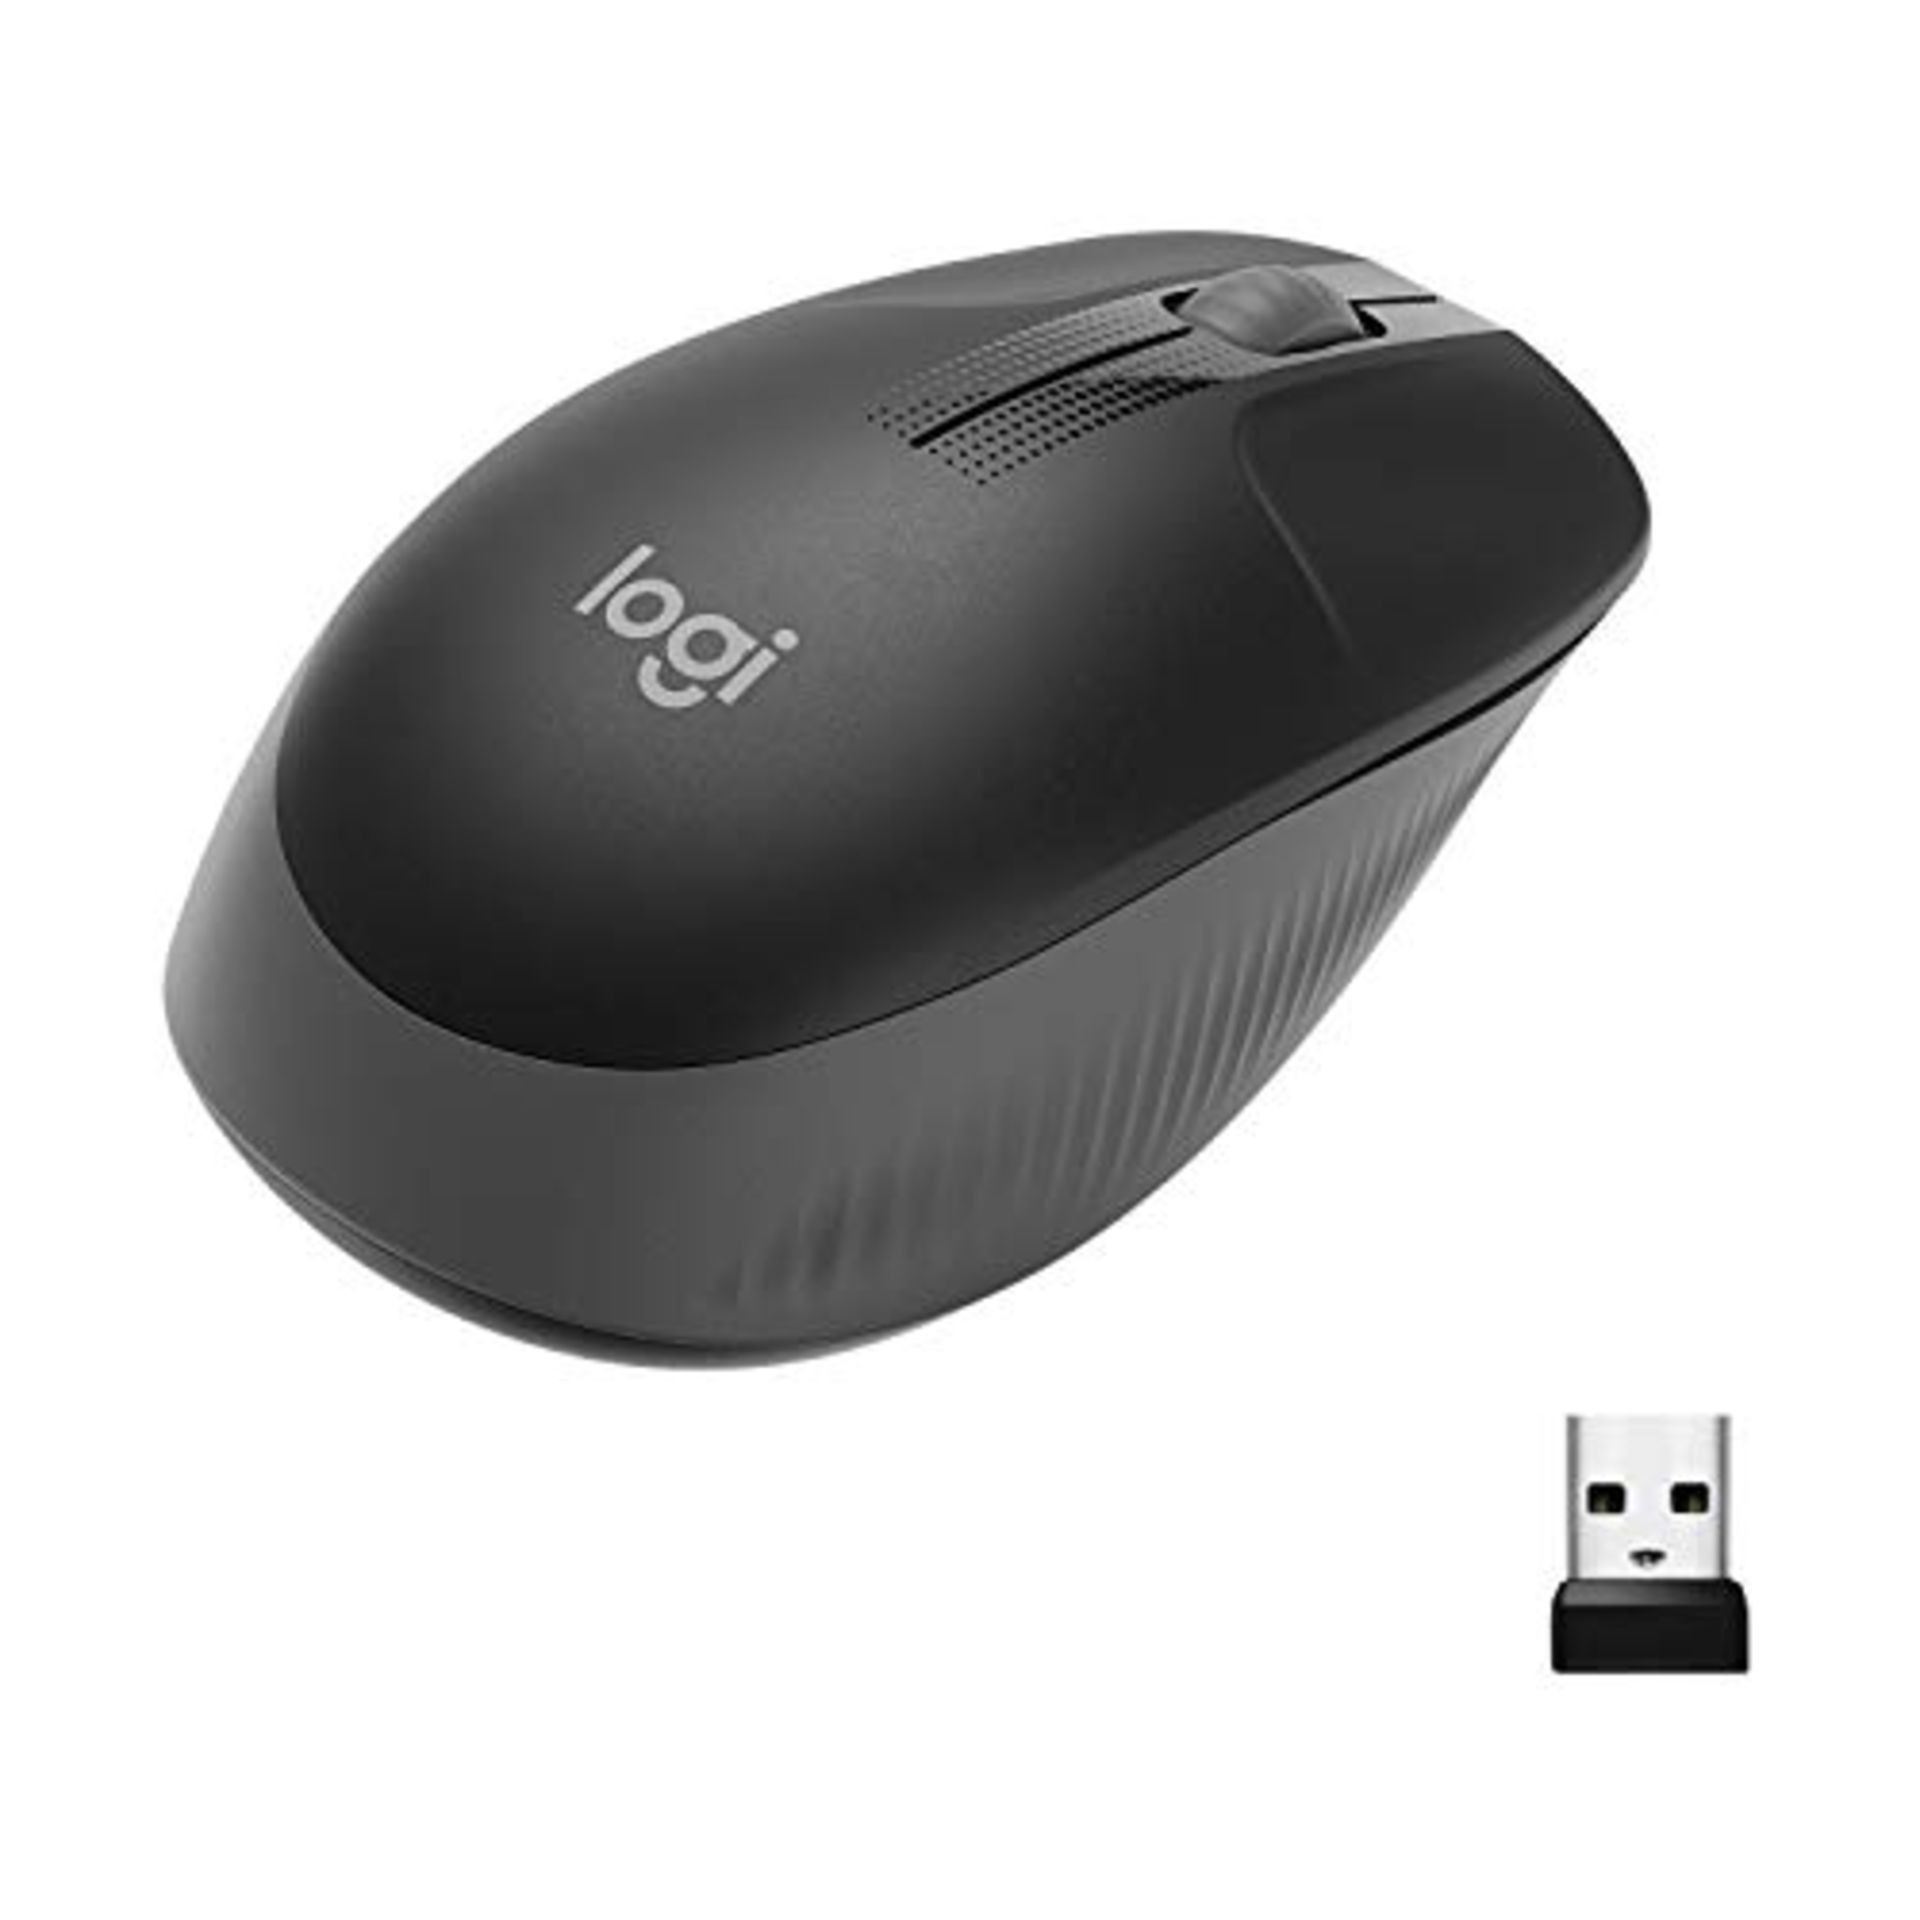 Logitech M190 Wireless Mouse, Ambidextrous Curved Design, Battery life up to 18 months